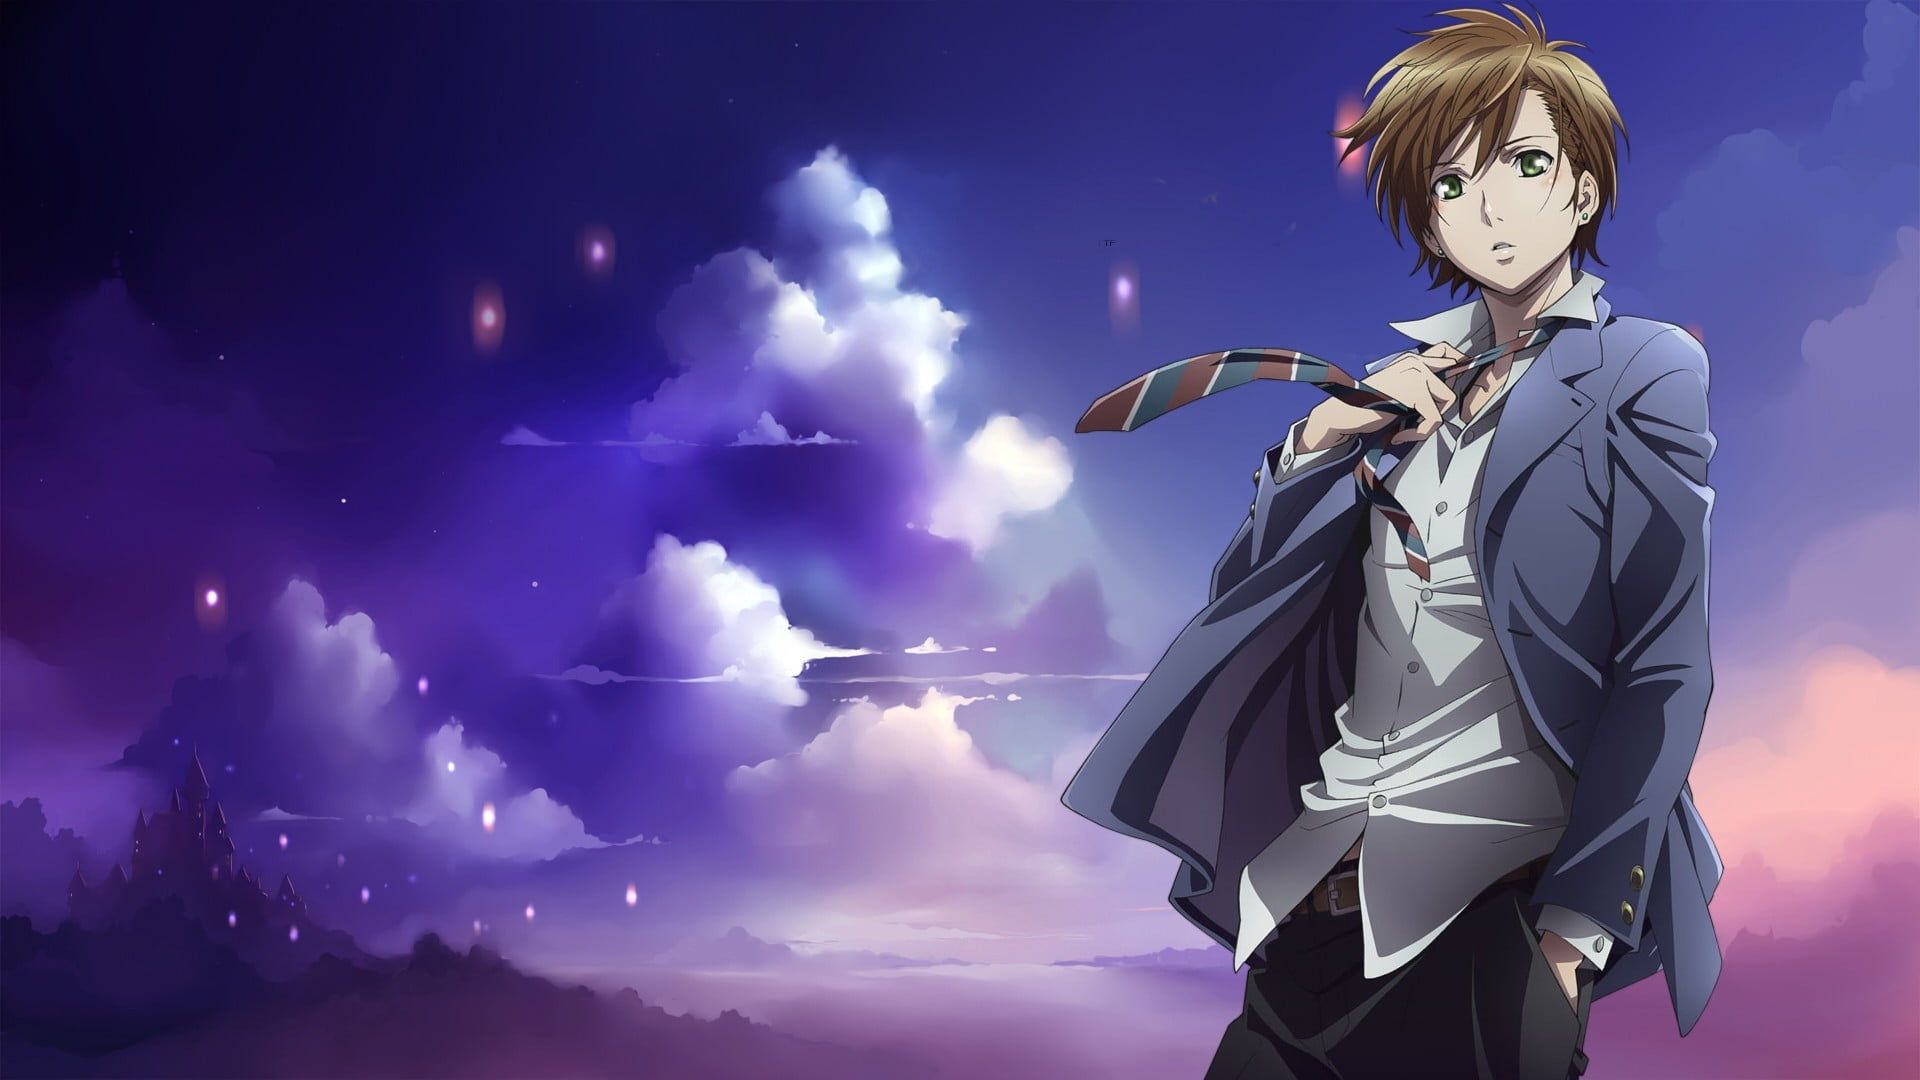 Man with uniform animated character wallpaper, anime, school